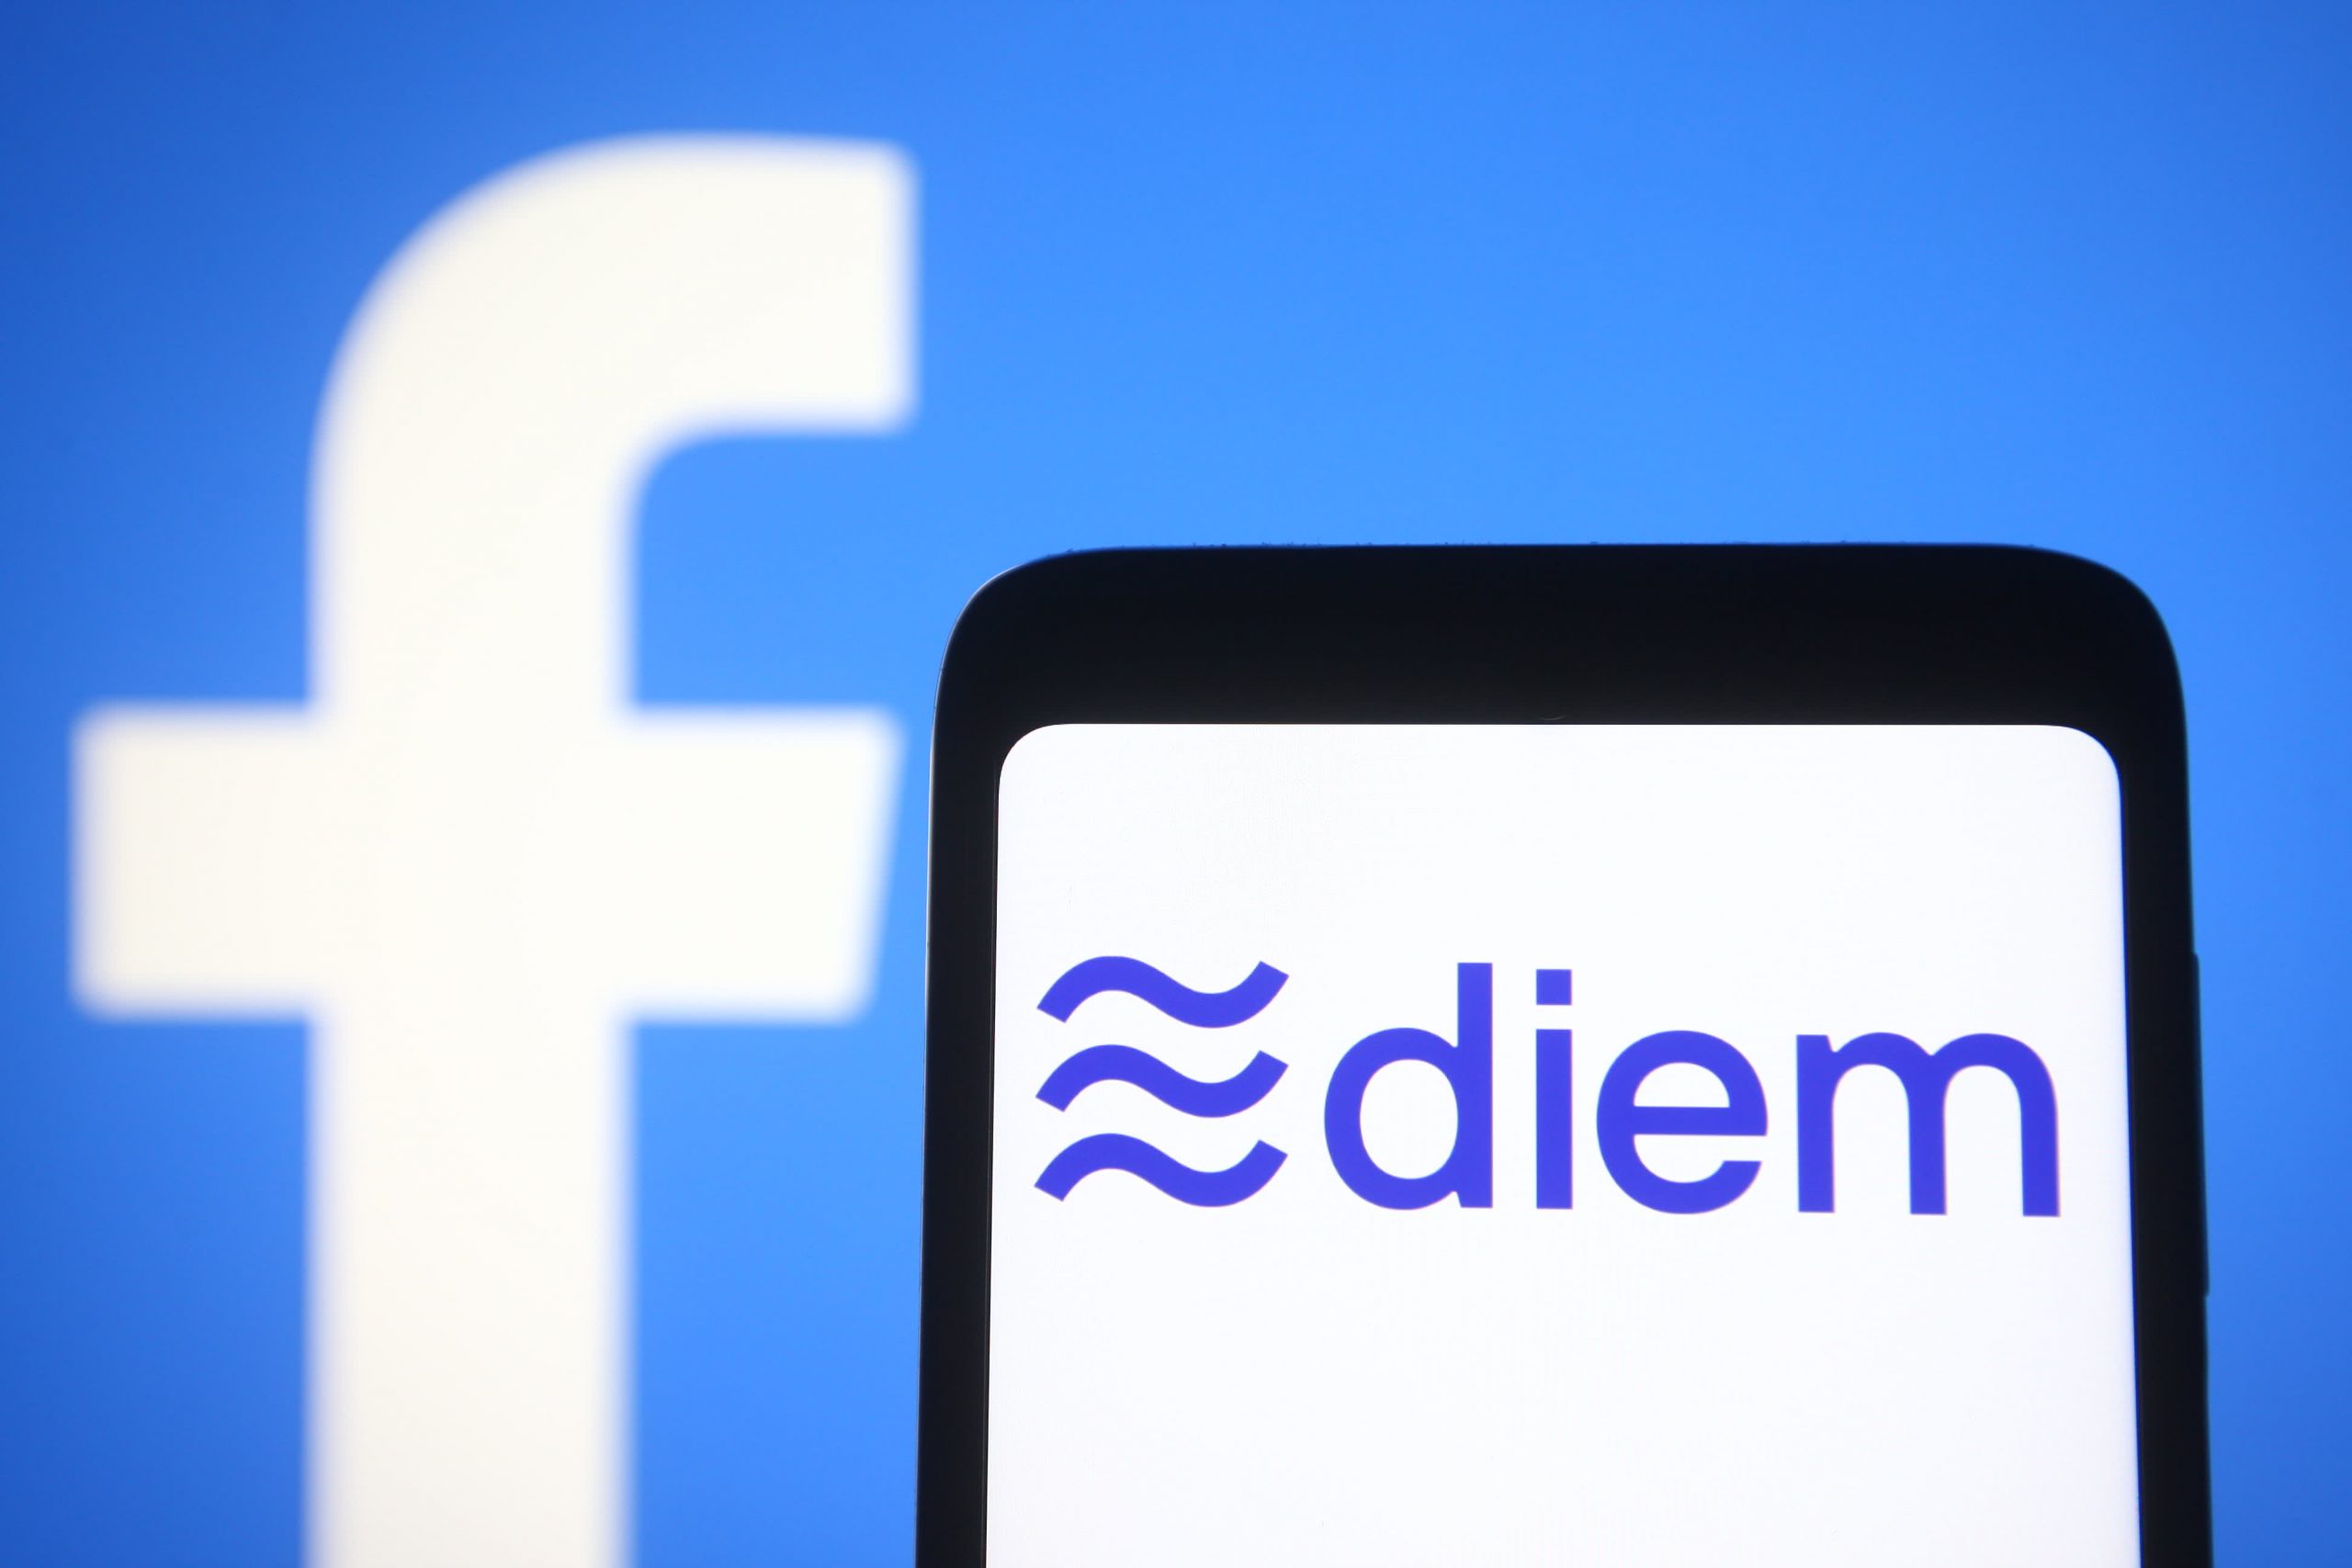 Facebook-backed Diem aims to launch digital currency pilot later this year